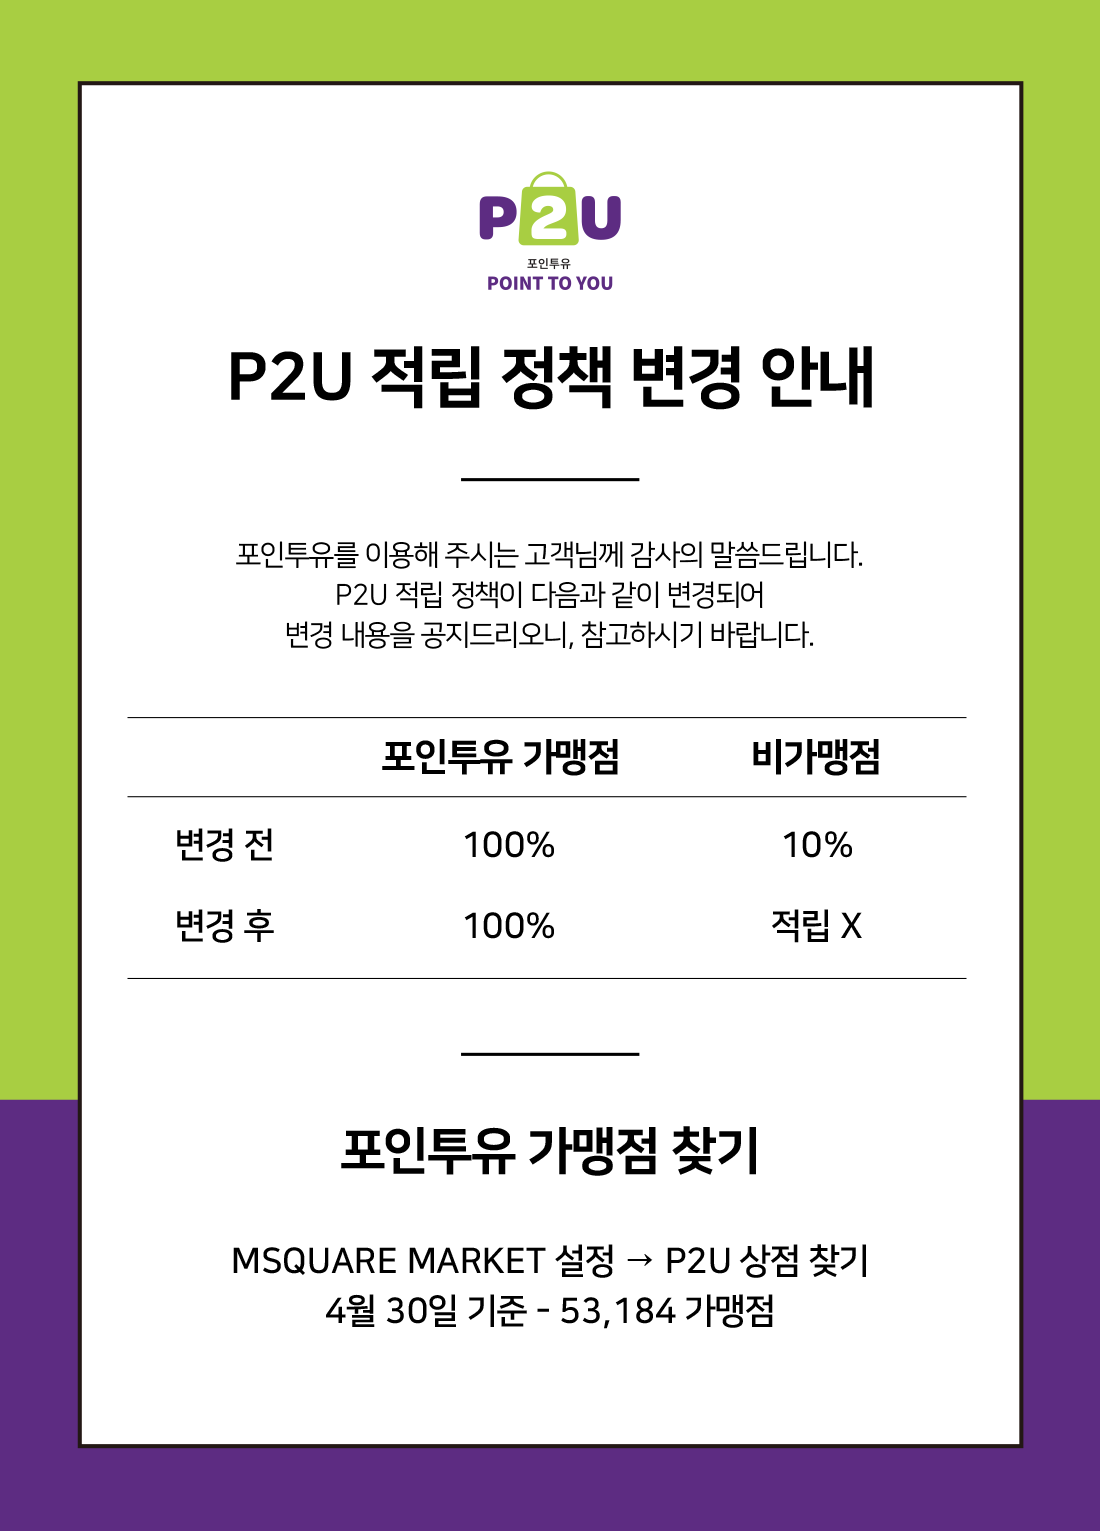 P2U_point_0430.png